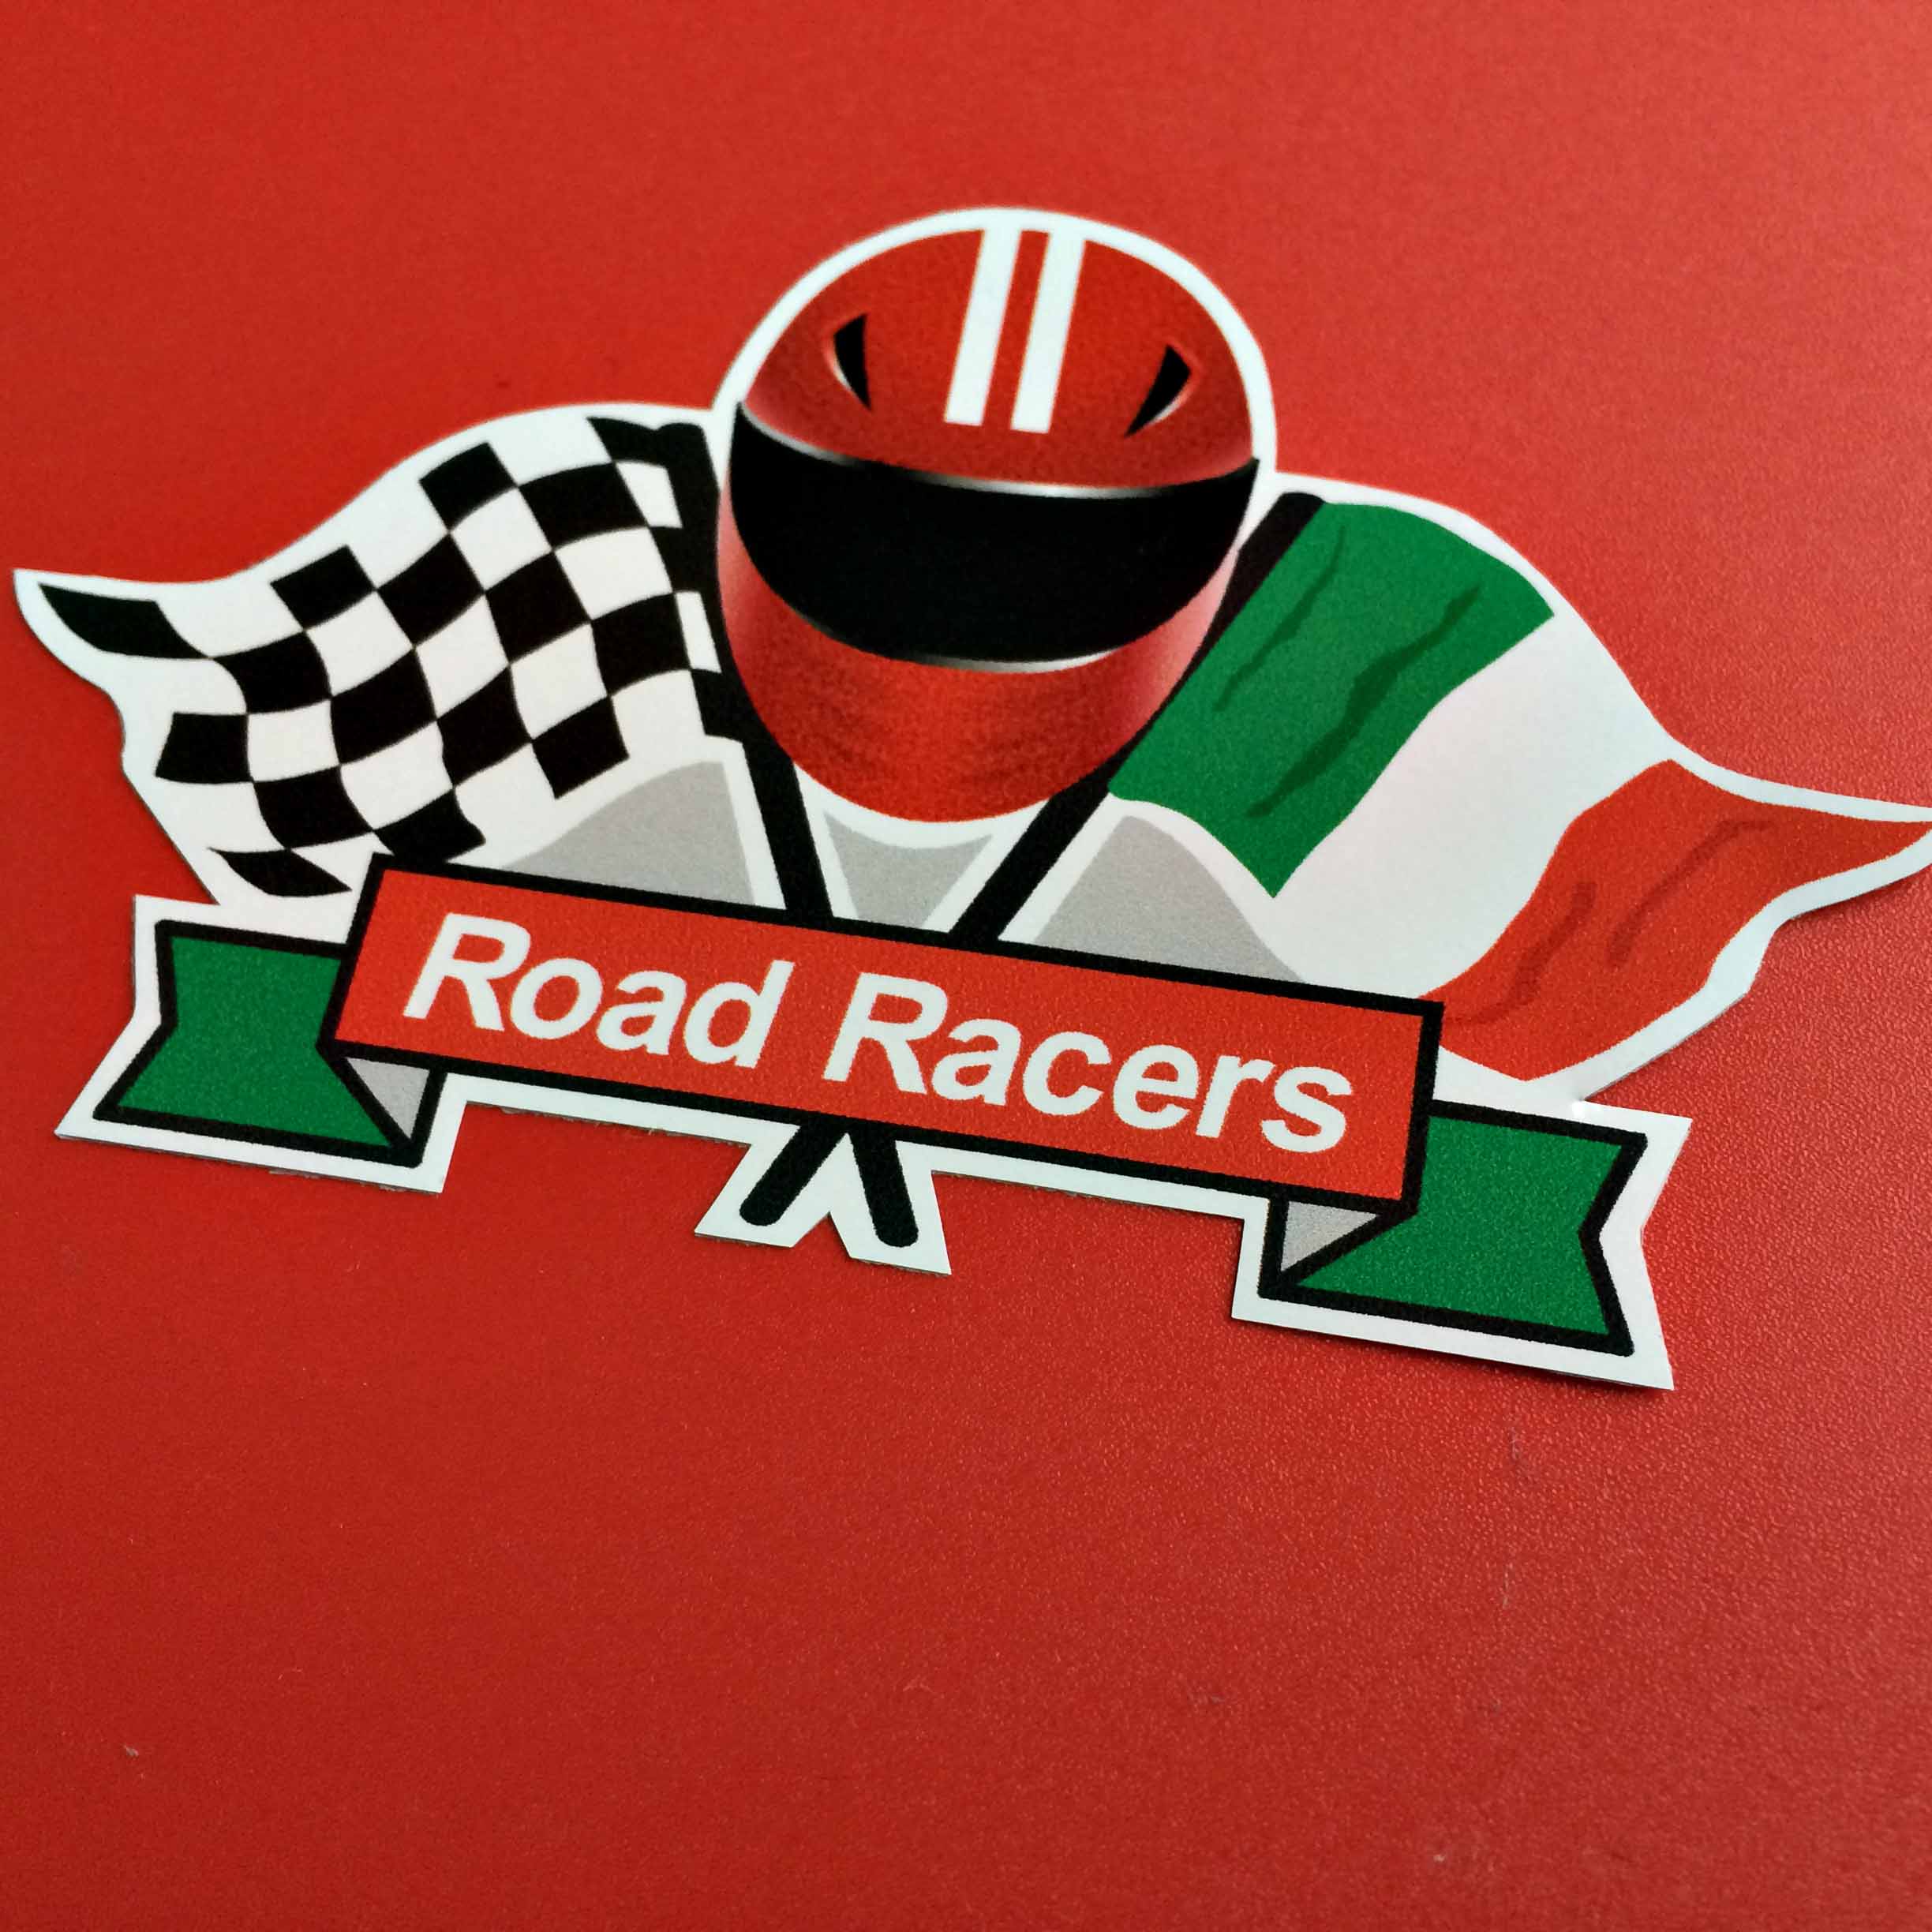 ITALIAN ROAD RACER STICKER. Road Racers in white lettering on a red and green banner. A red motorcycle helmet with two white vertical stripes sits between crossed flags; a chequered and Italy flag.